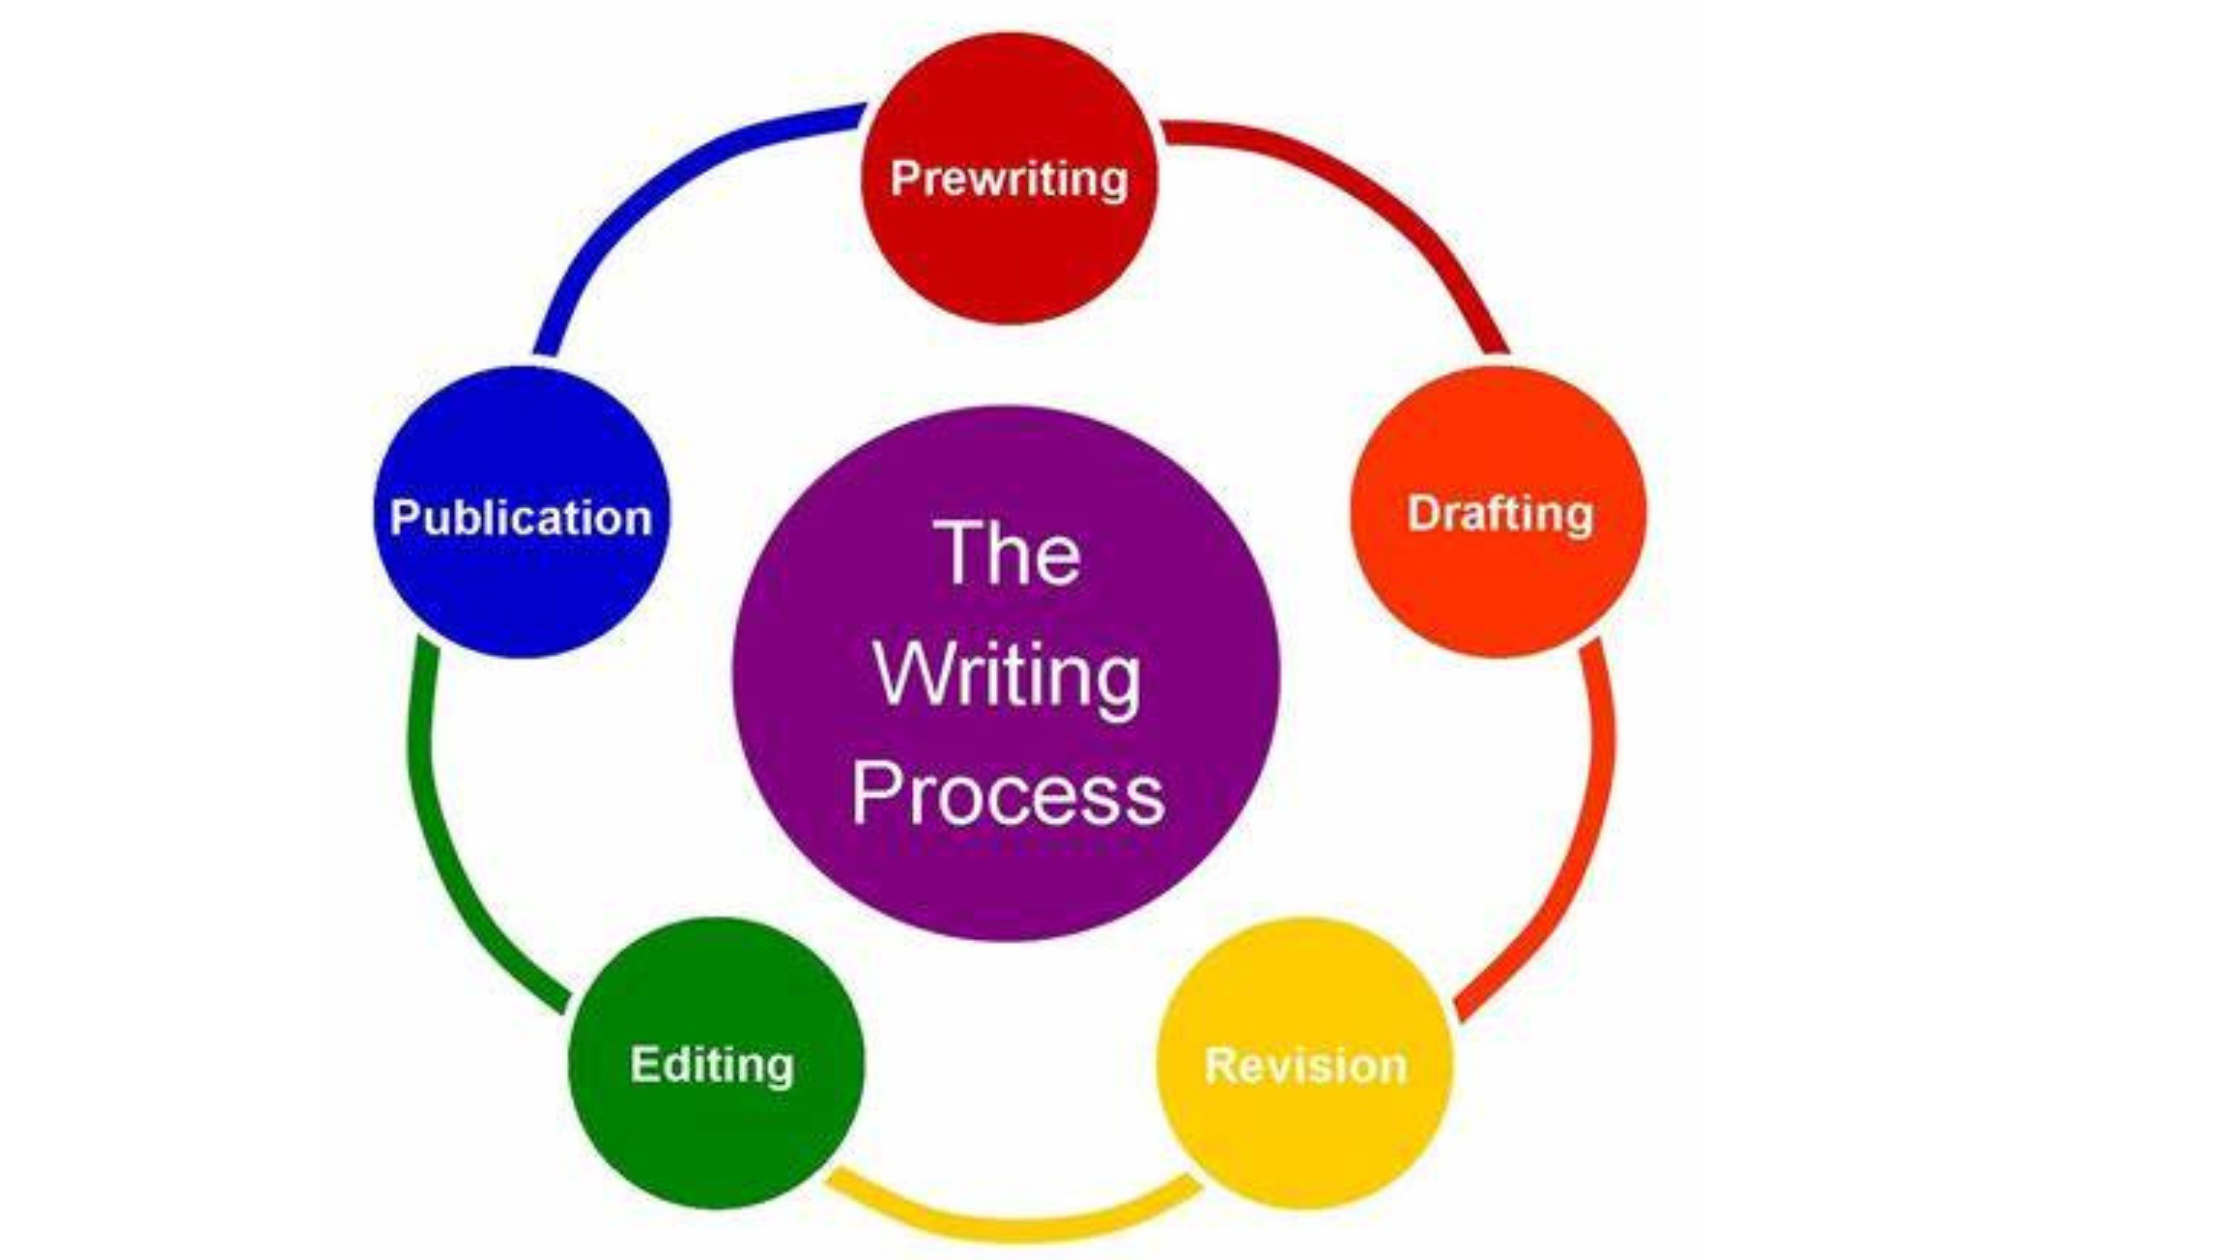 Learning about Writing Process: Drafting, Revising, Editing